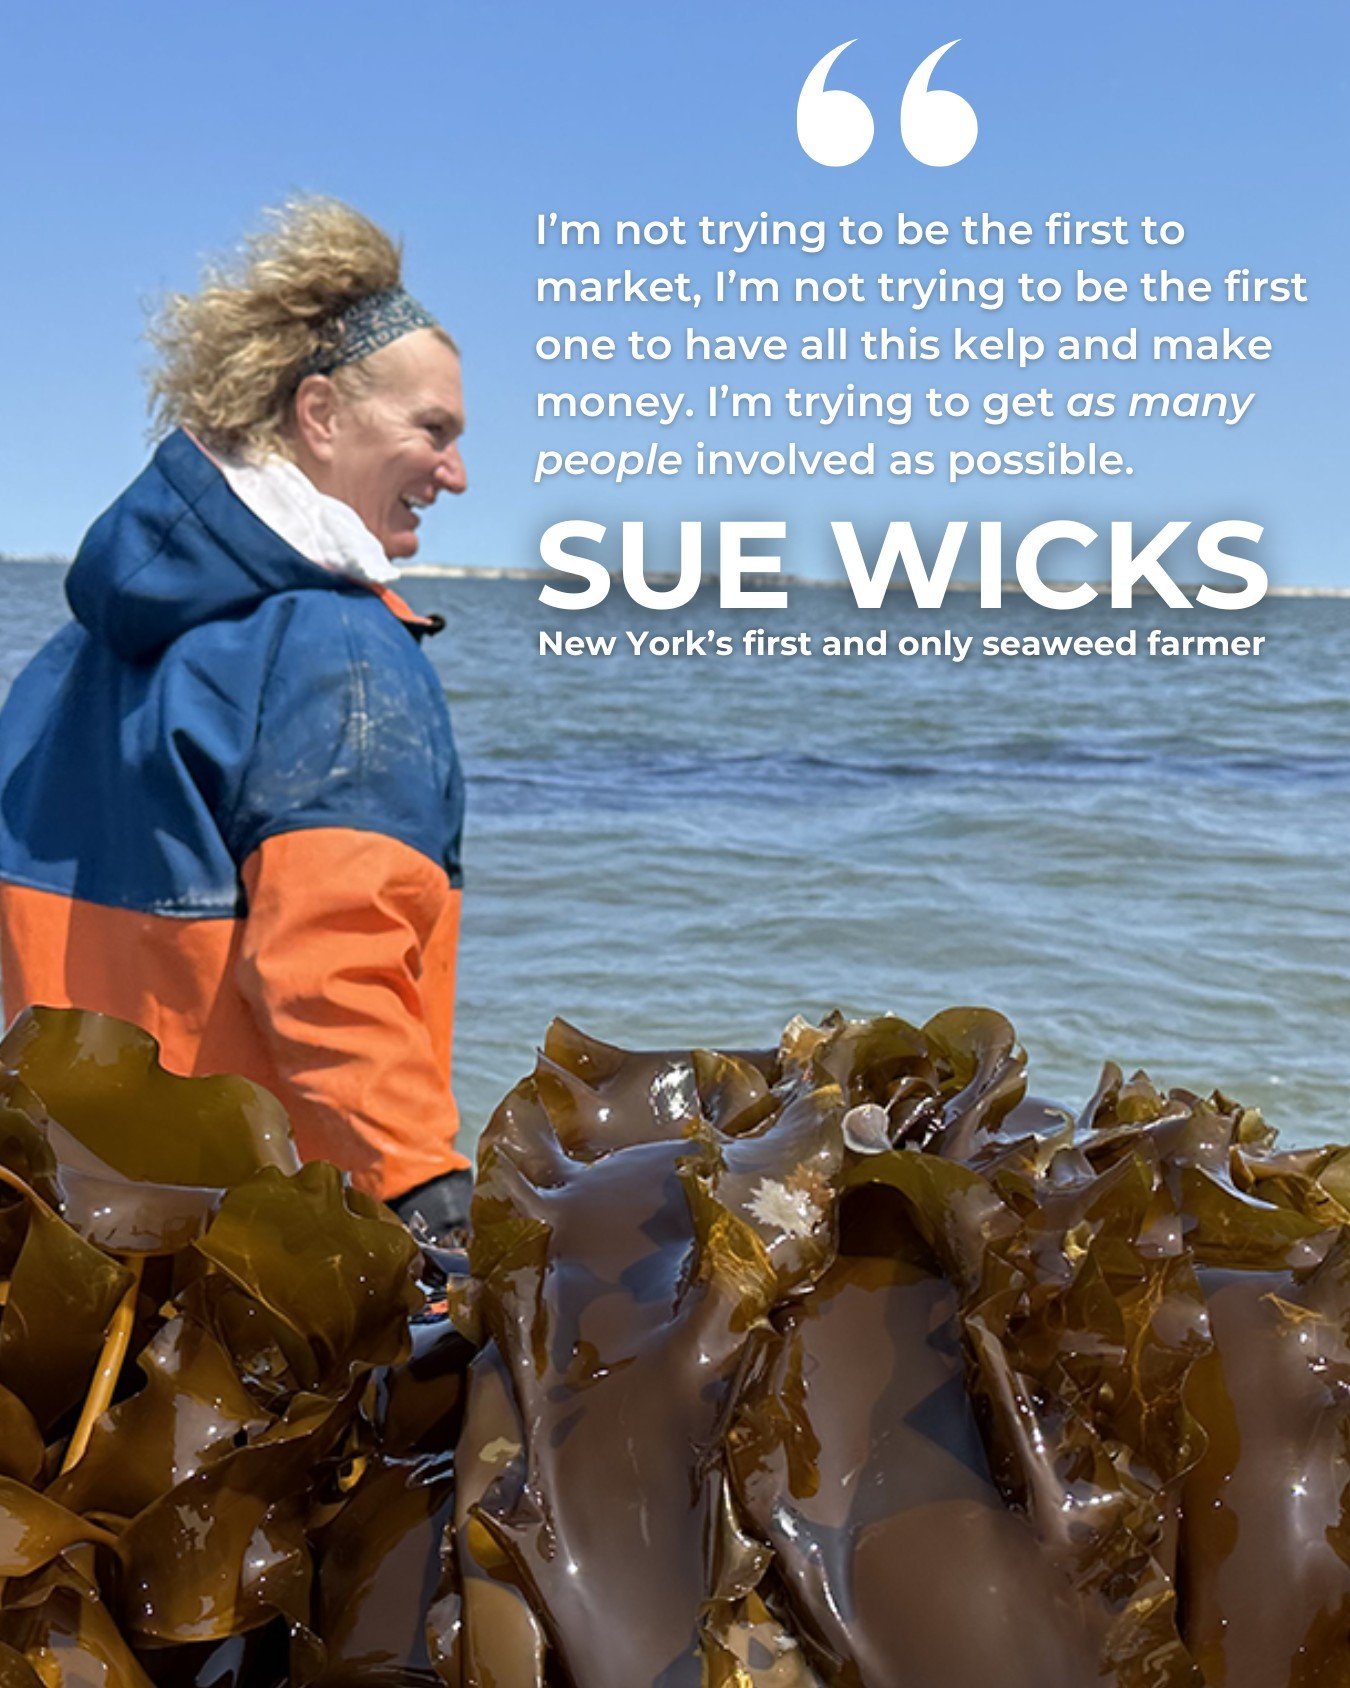 Meet SUE WICKS&mdash;the woman pioneering commercial kelp farming in New York! 🌿⁠
⁠
🏀 A former pro basketball player in the WNBA, Sue&rsquo;s been farming oysters for seven years and is now the first and only kelp farmer in the state. ⁠
⁠
Her compa